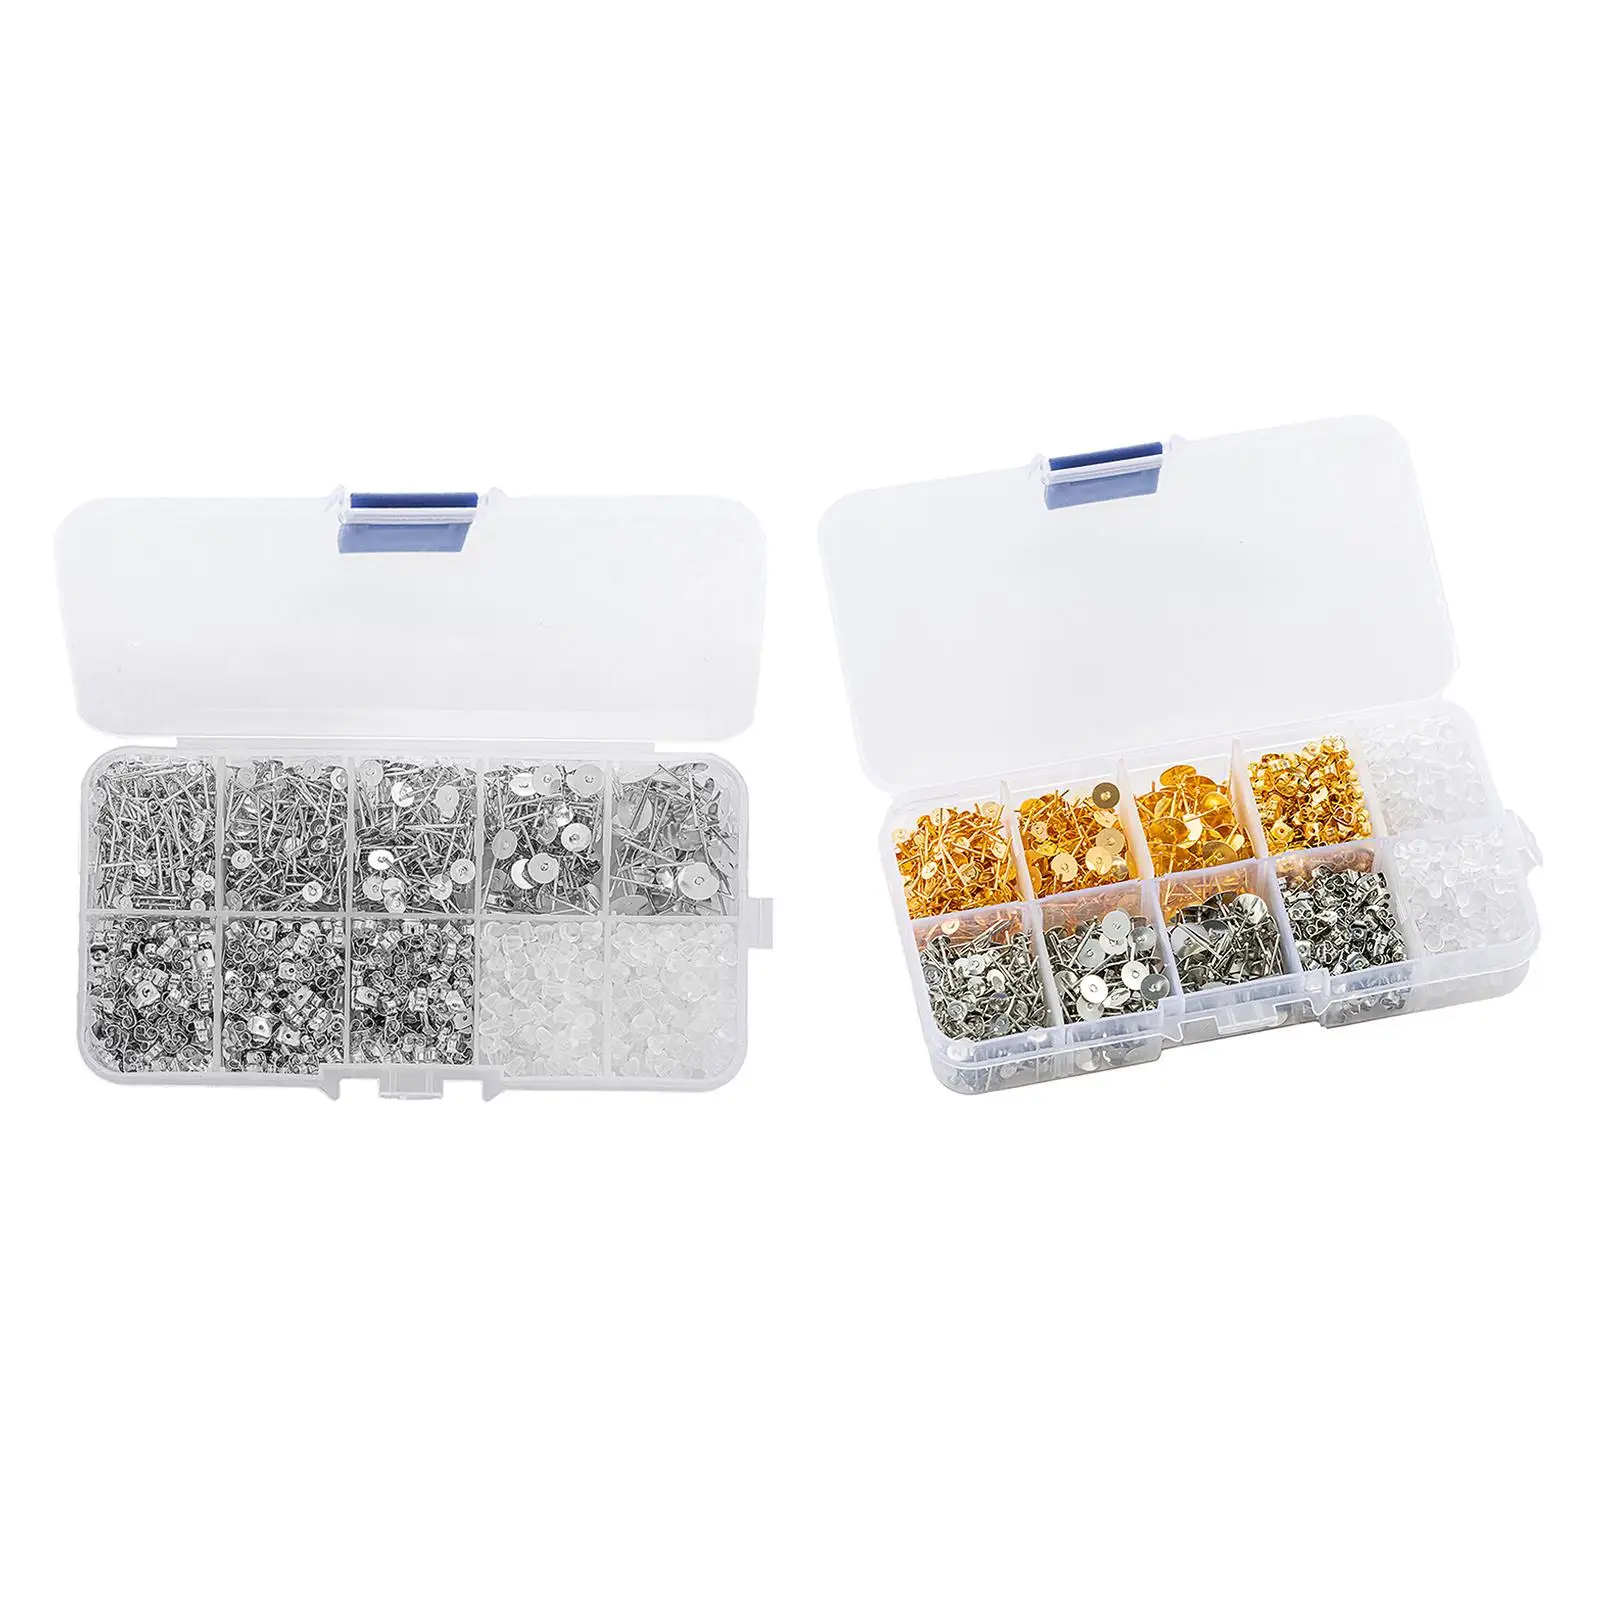  Earrings Flat-Bottomed  Kit for Jewelry Making DIY Crafting